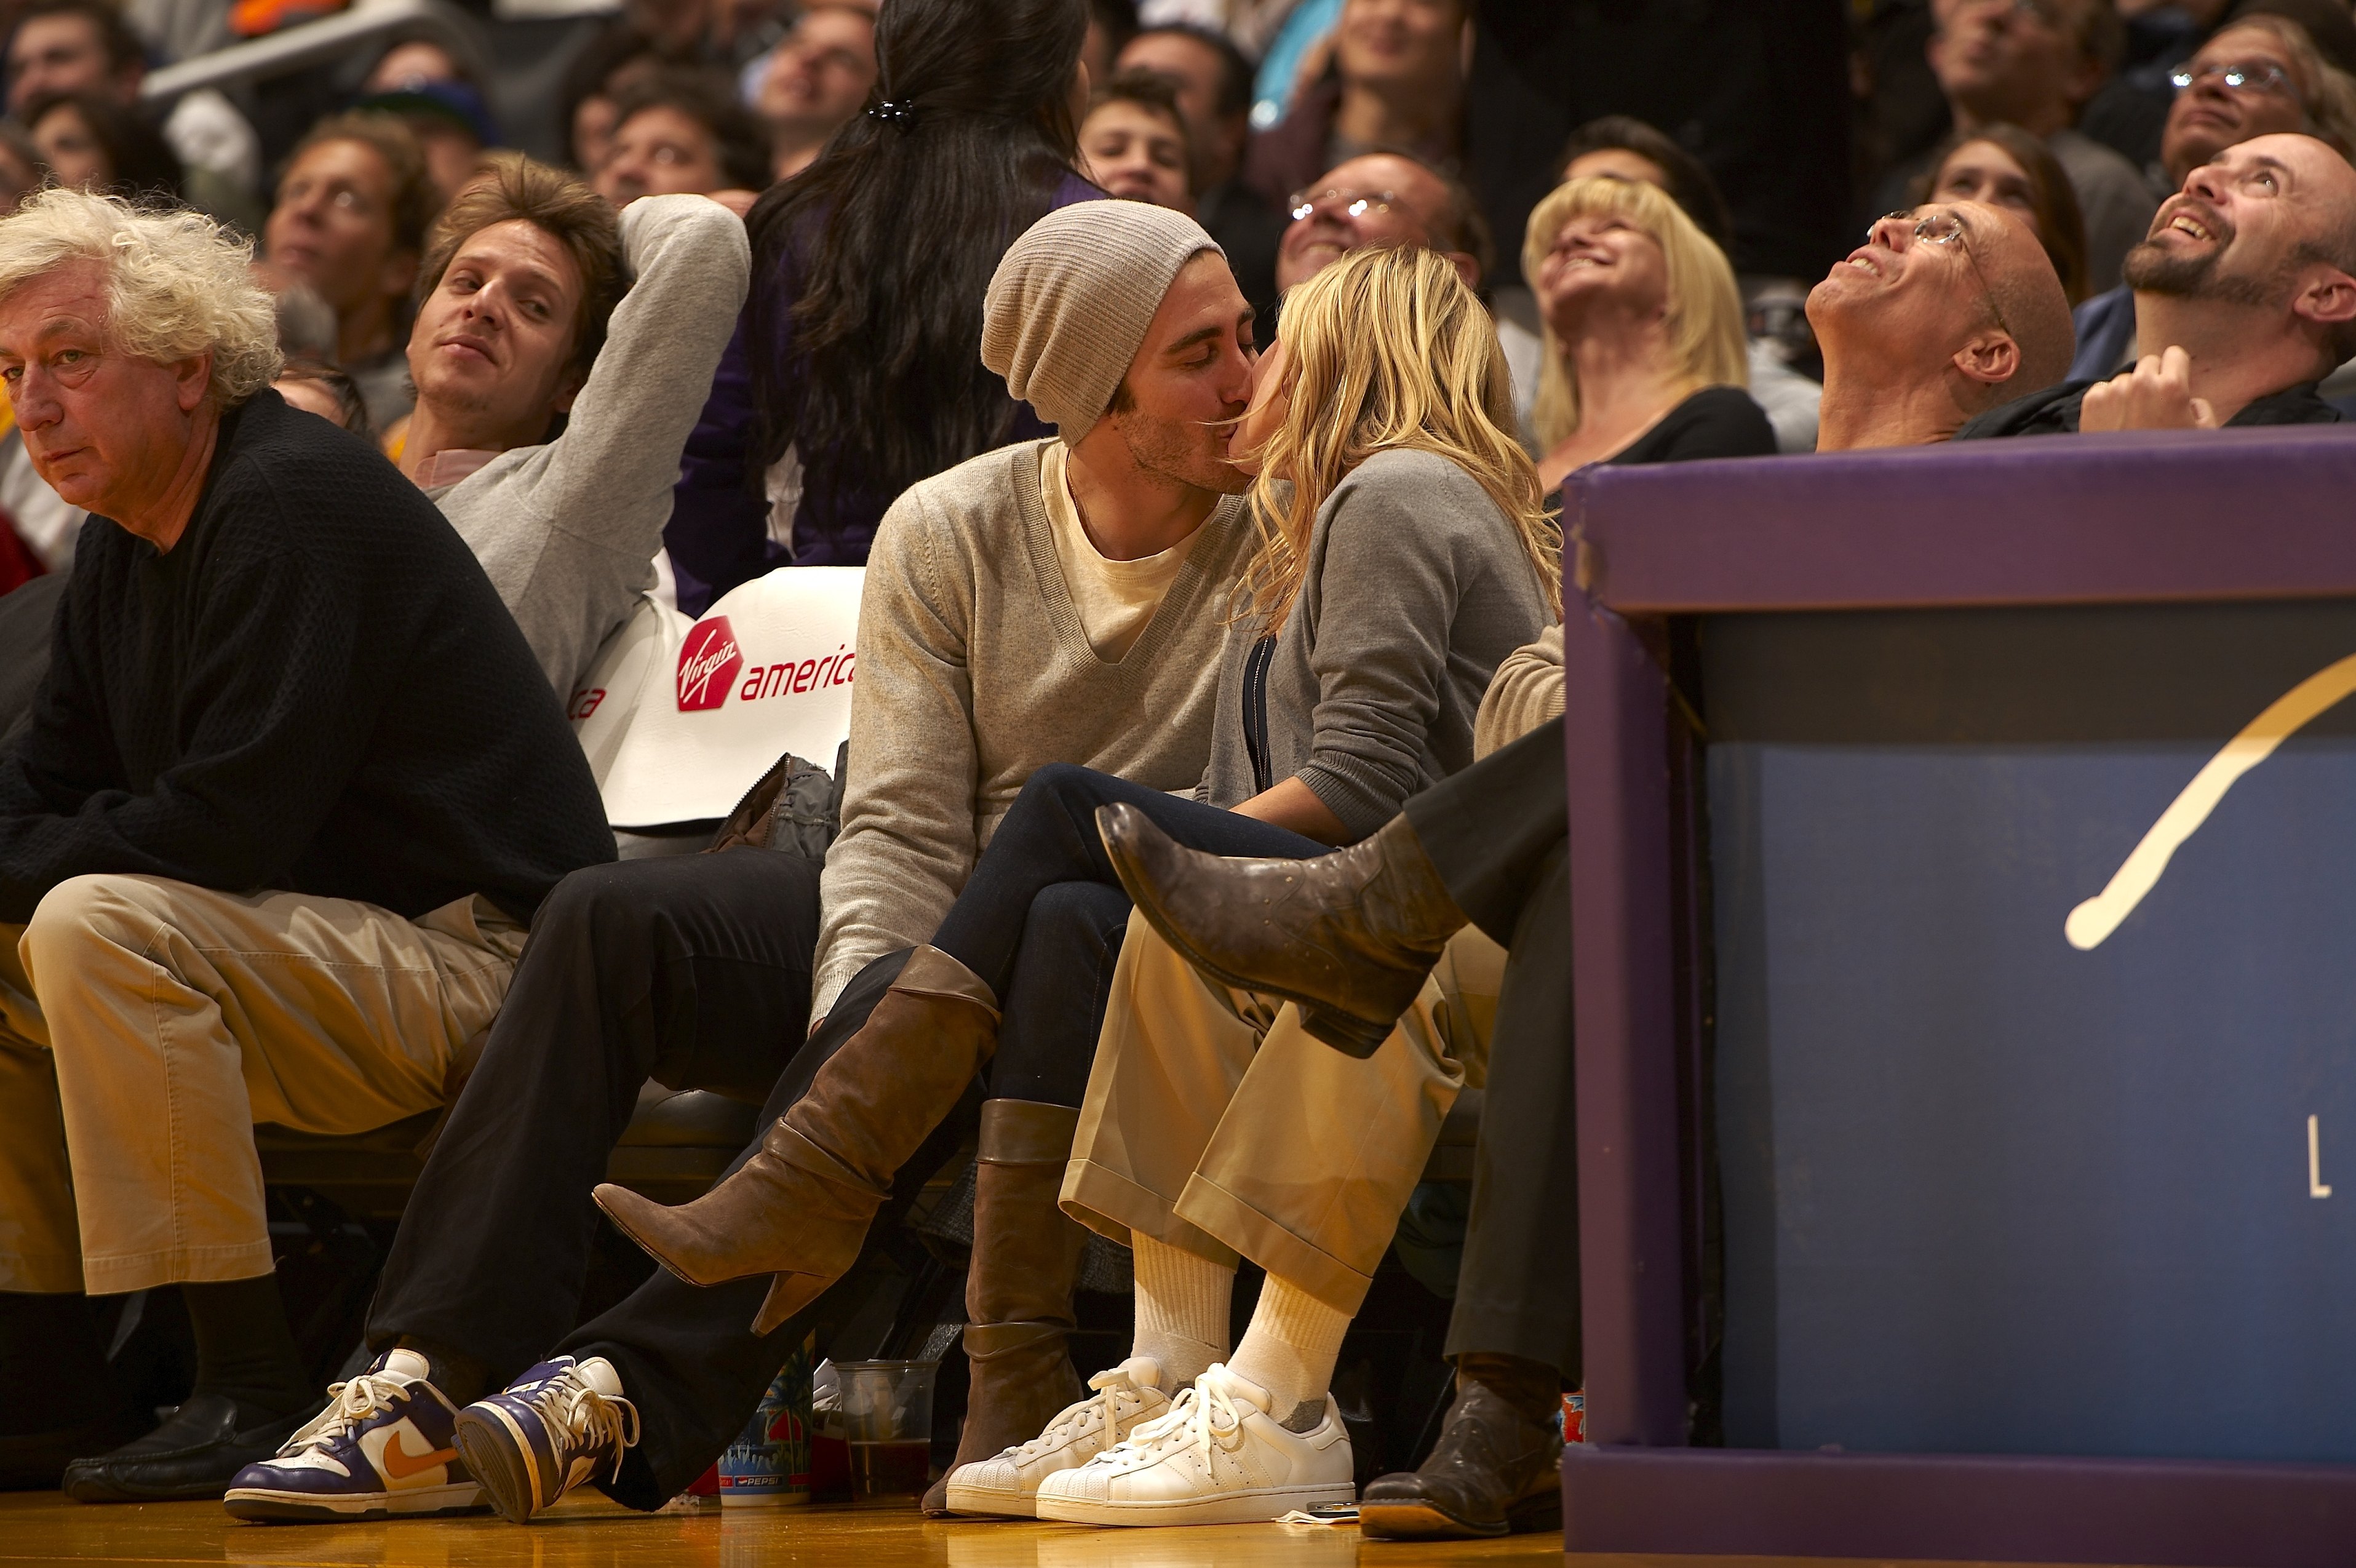 Jake Gyllenhaal and Reese Witherspoon during the Los Angeles Lakers vs Portland Trail Blazers game in Los Angeles, on January 4, 2009. | Source: Getty Image